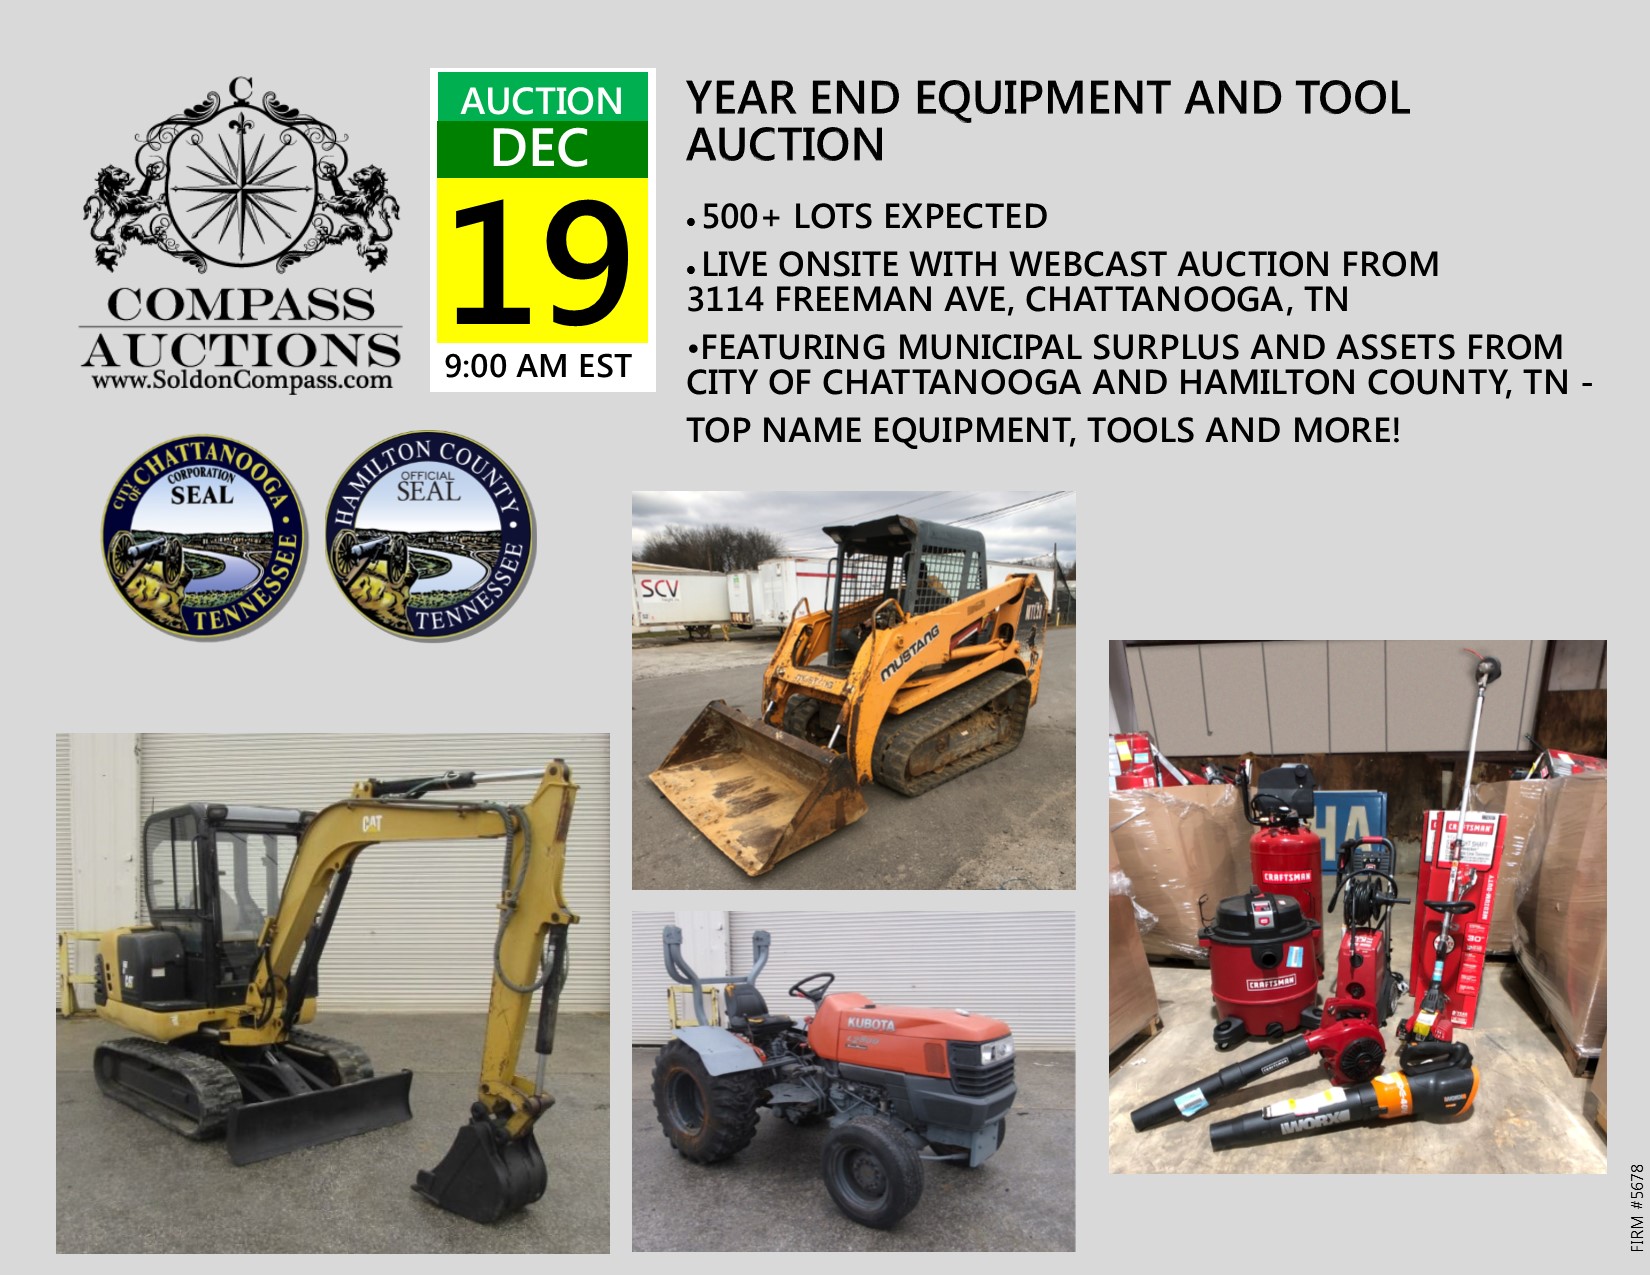 compass auctions year end equipment tool auction